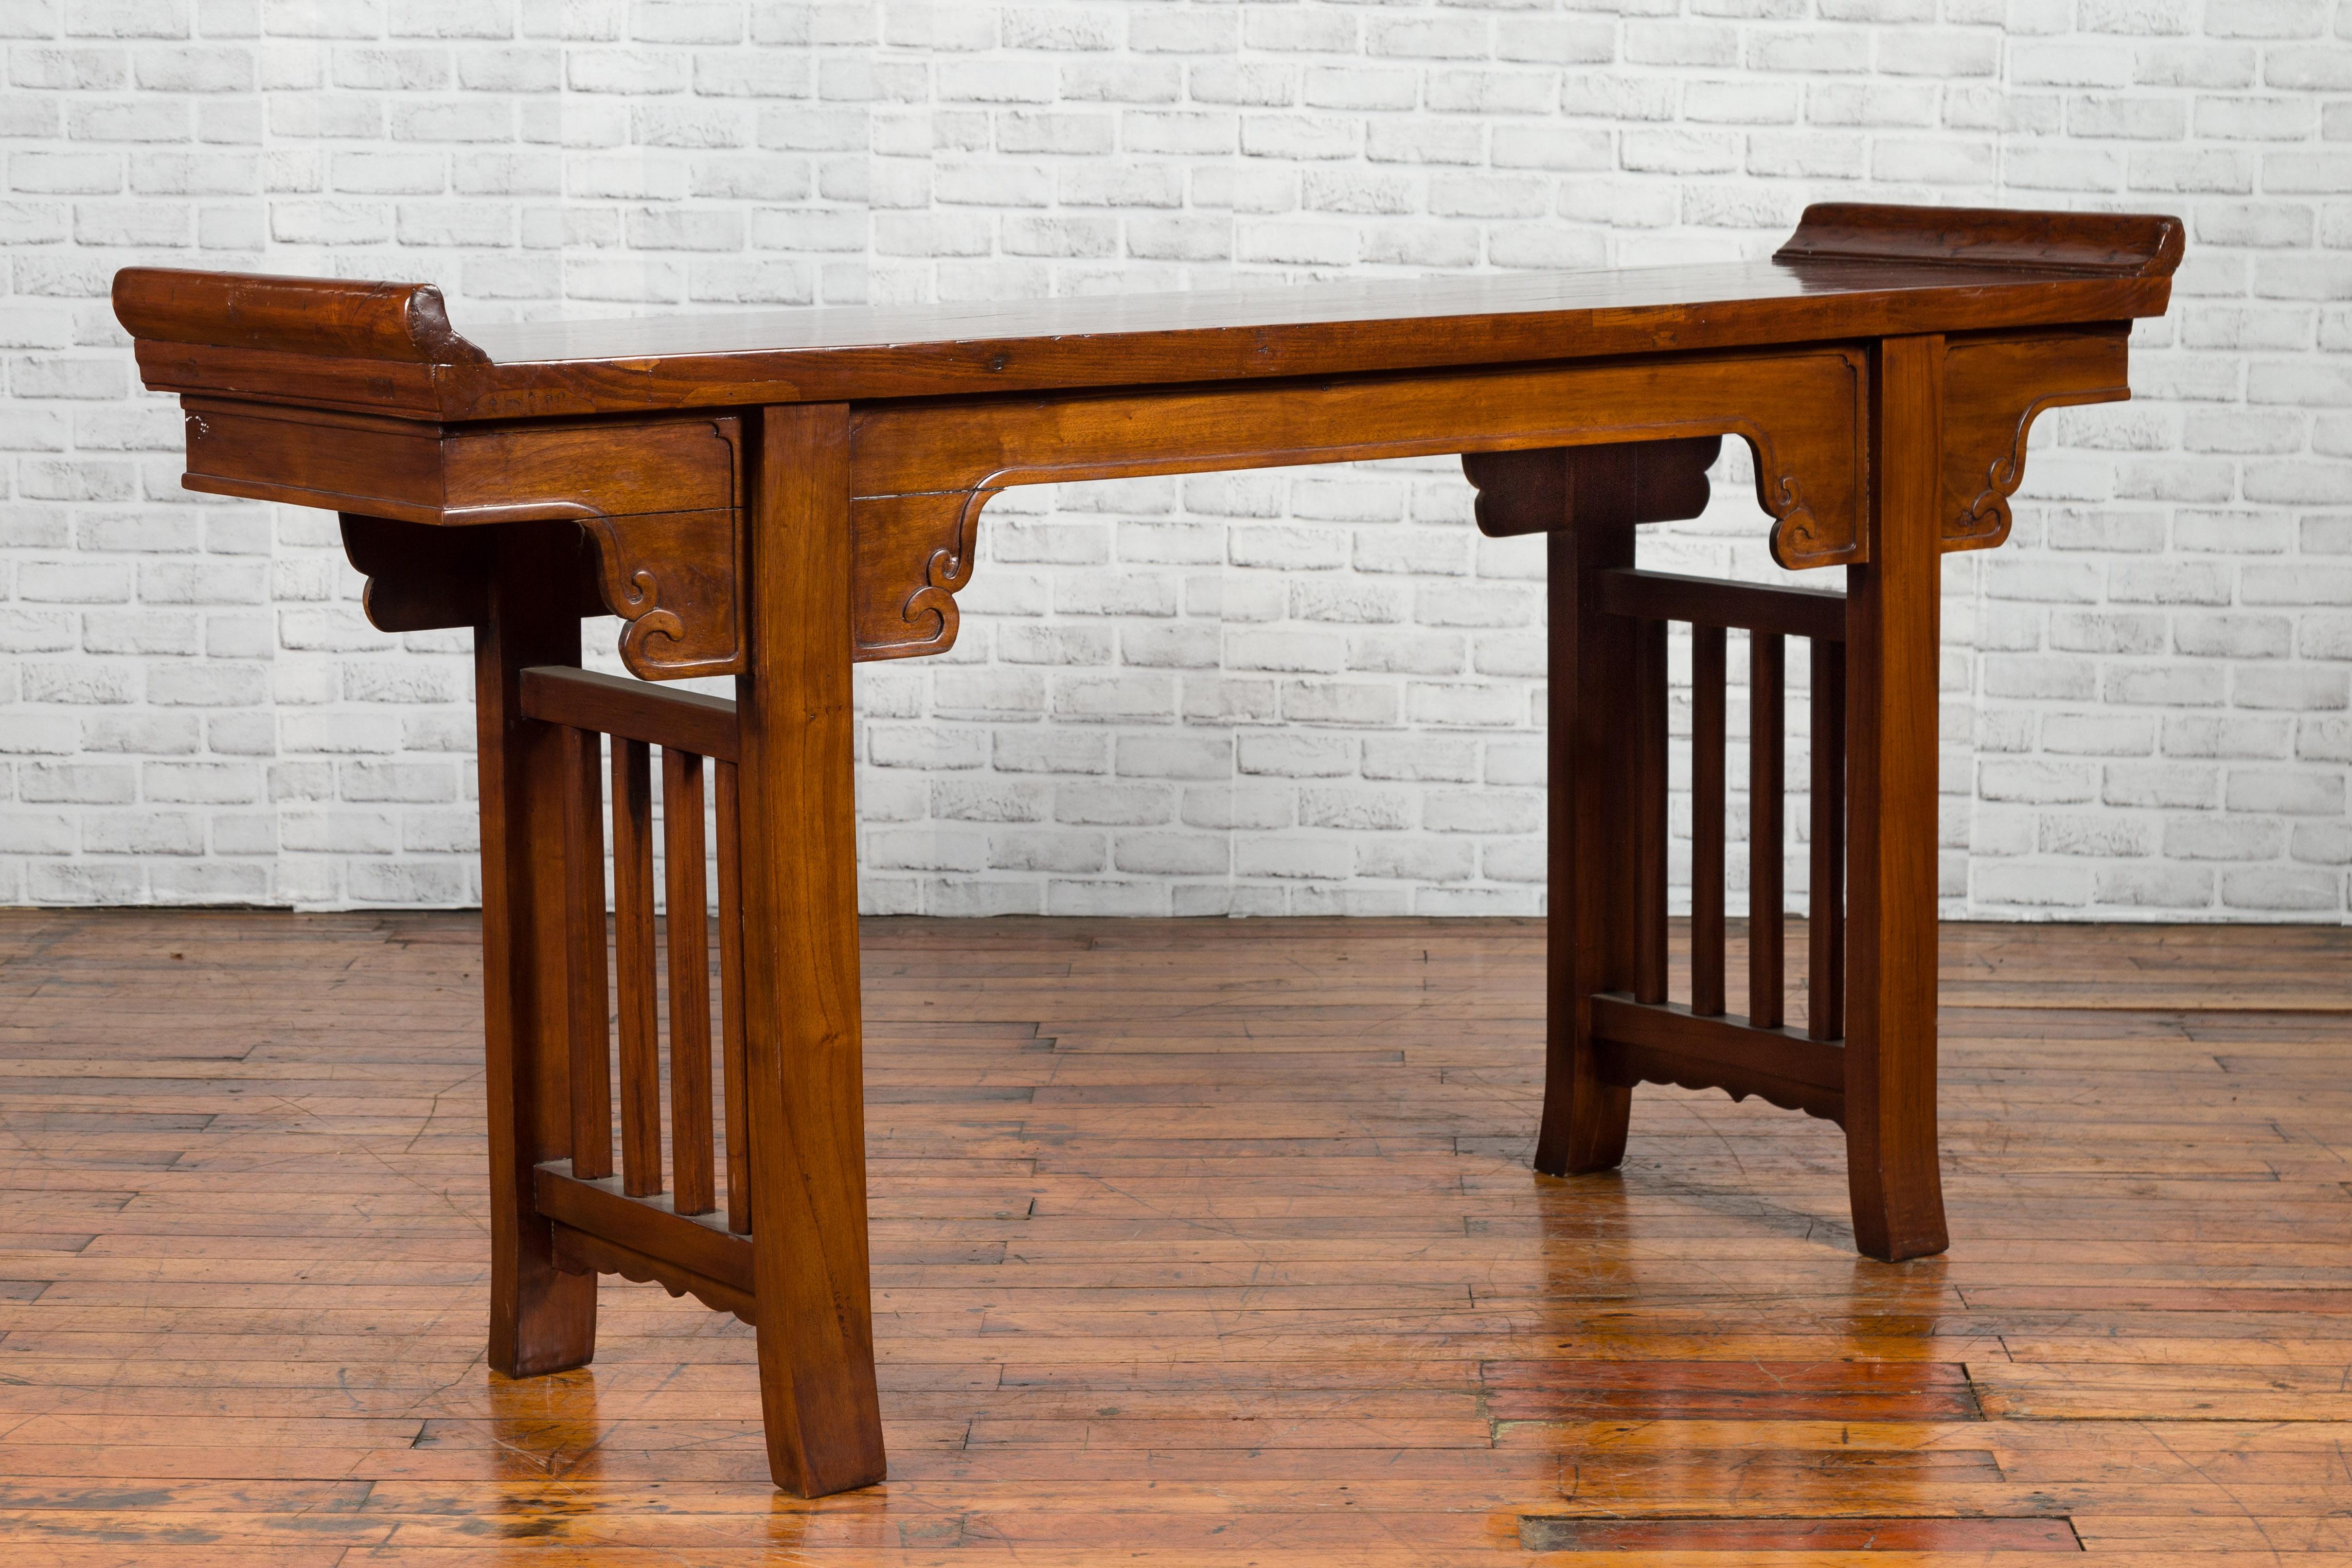 Chinese Qing Dynasty Period 19th Century Elm Console Table with Carved Spandrels In Good Condition For Sale In Yonkers, NY